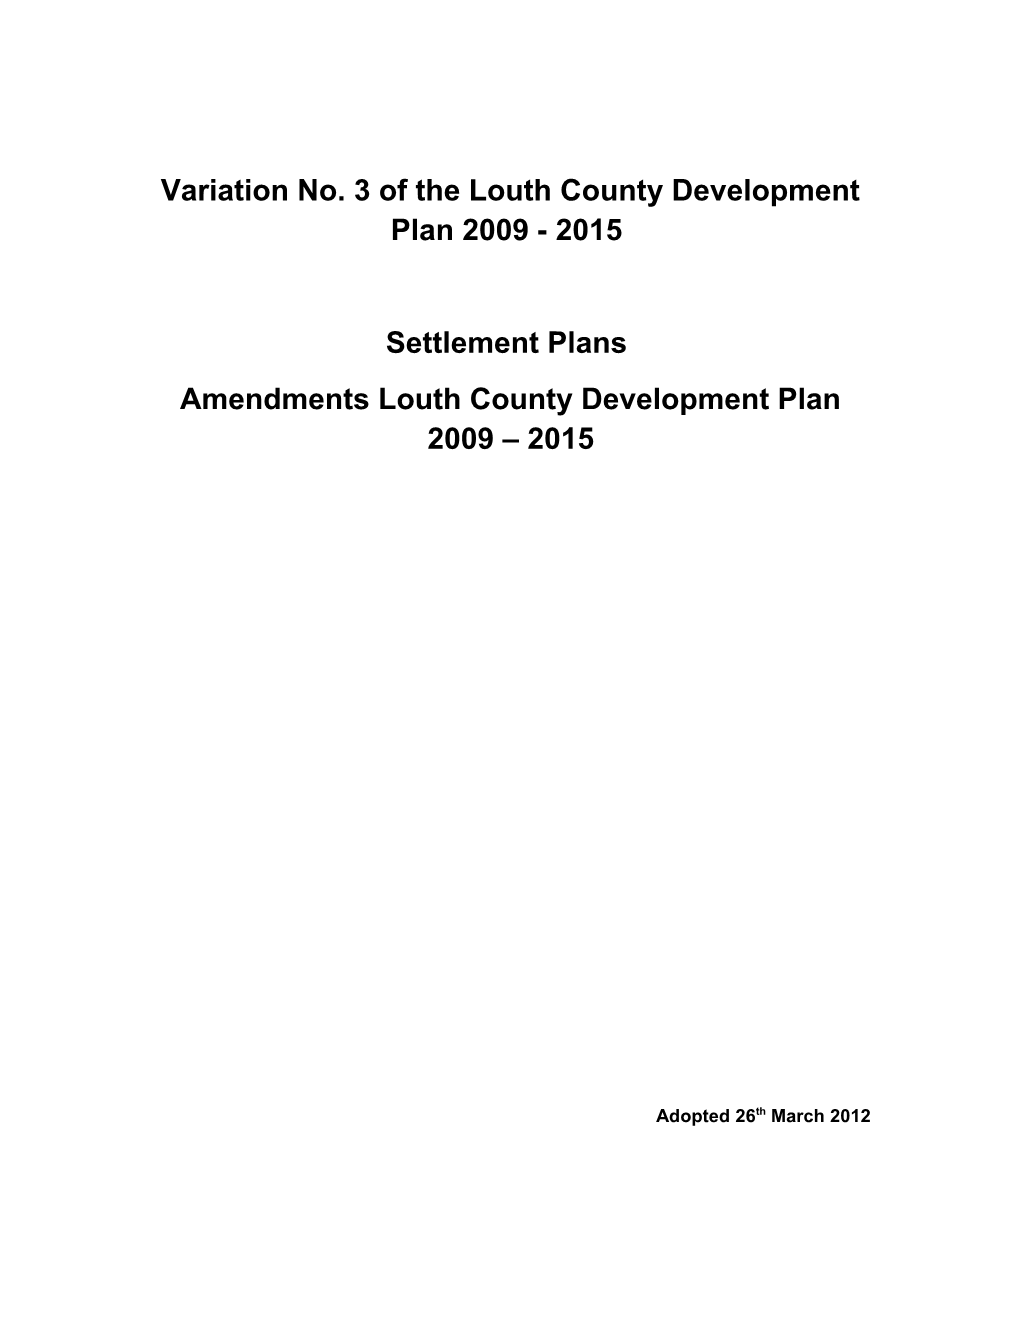 Variation No. 3 of the Louth County Development Plan 2009 - 2015